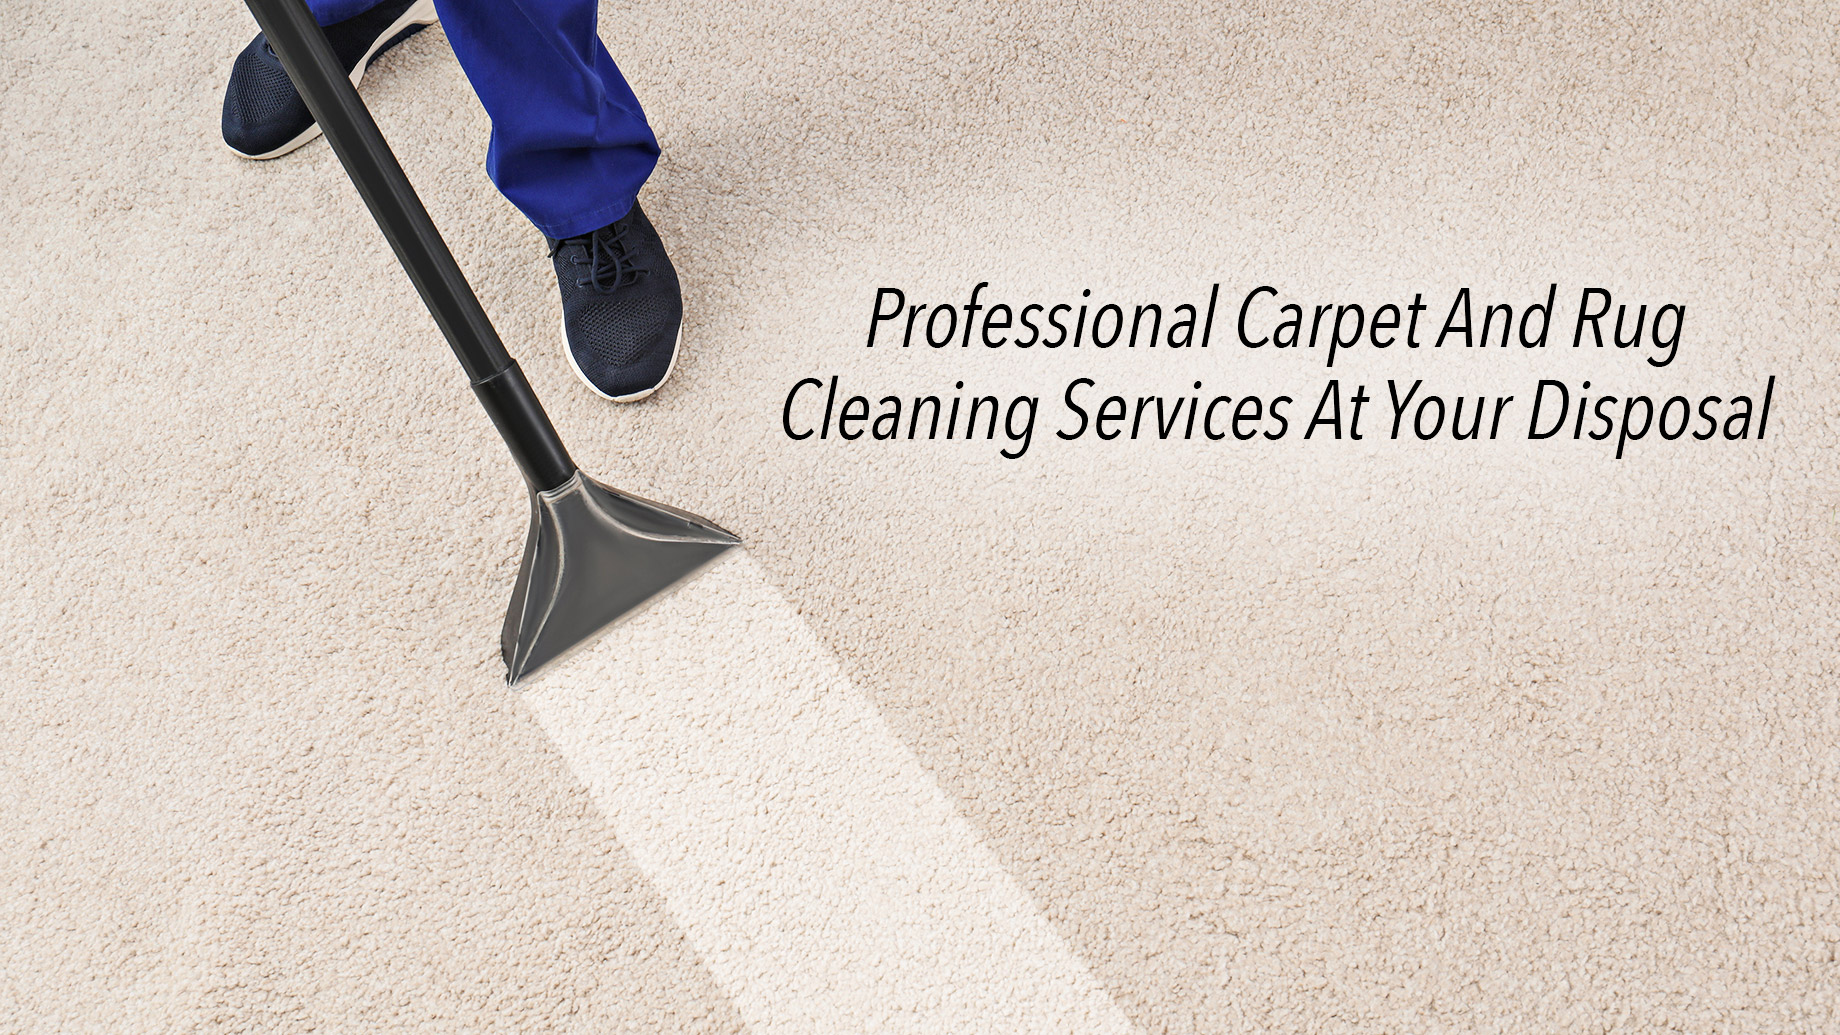 Professional Carpet And Rug Cleaning Services At Your Disposal